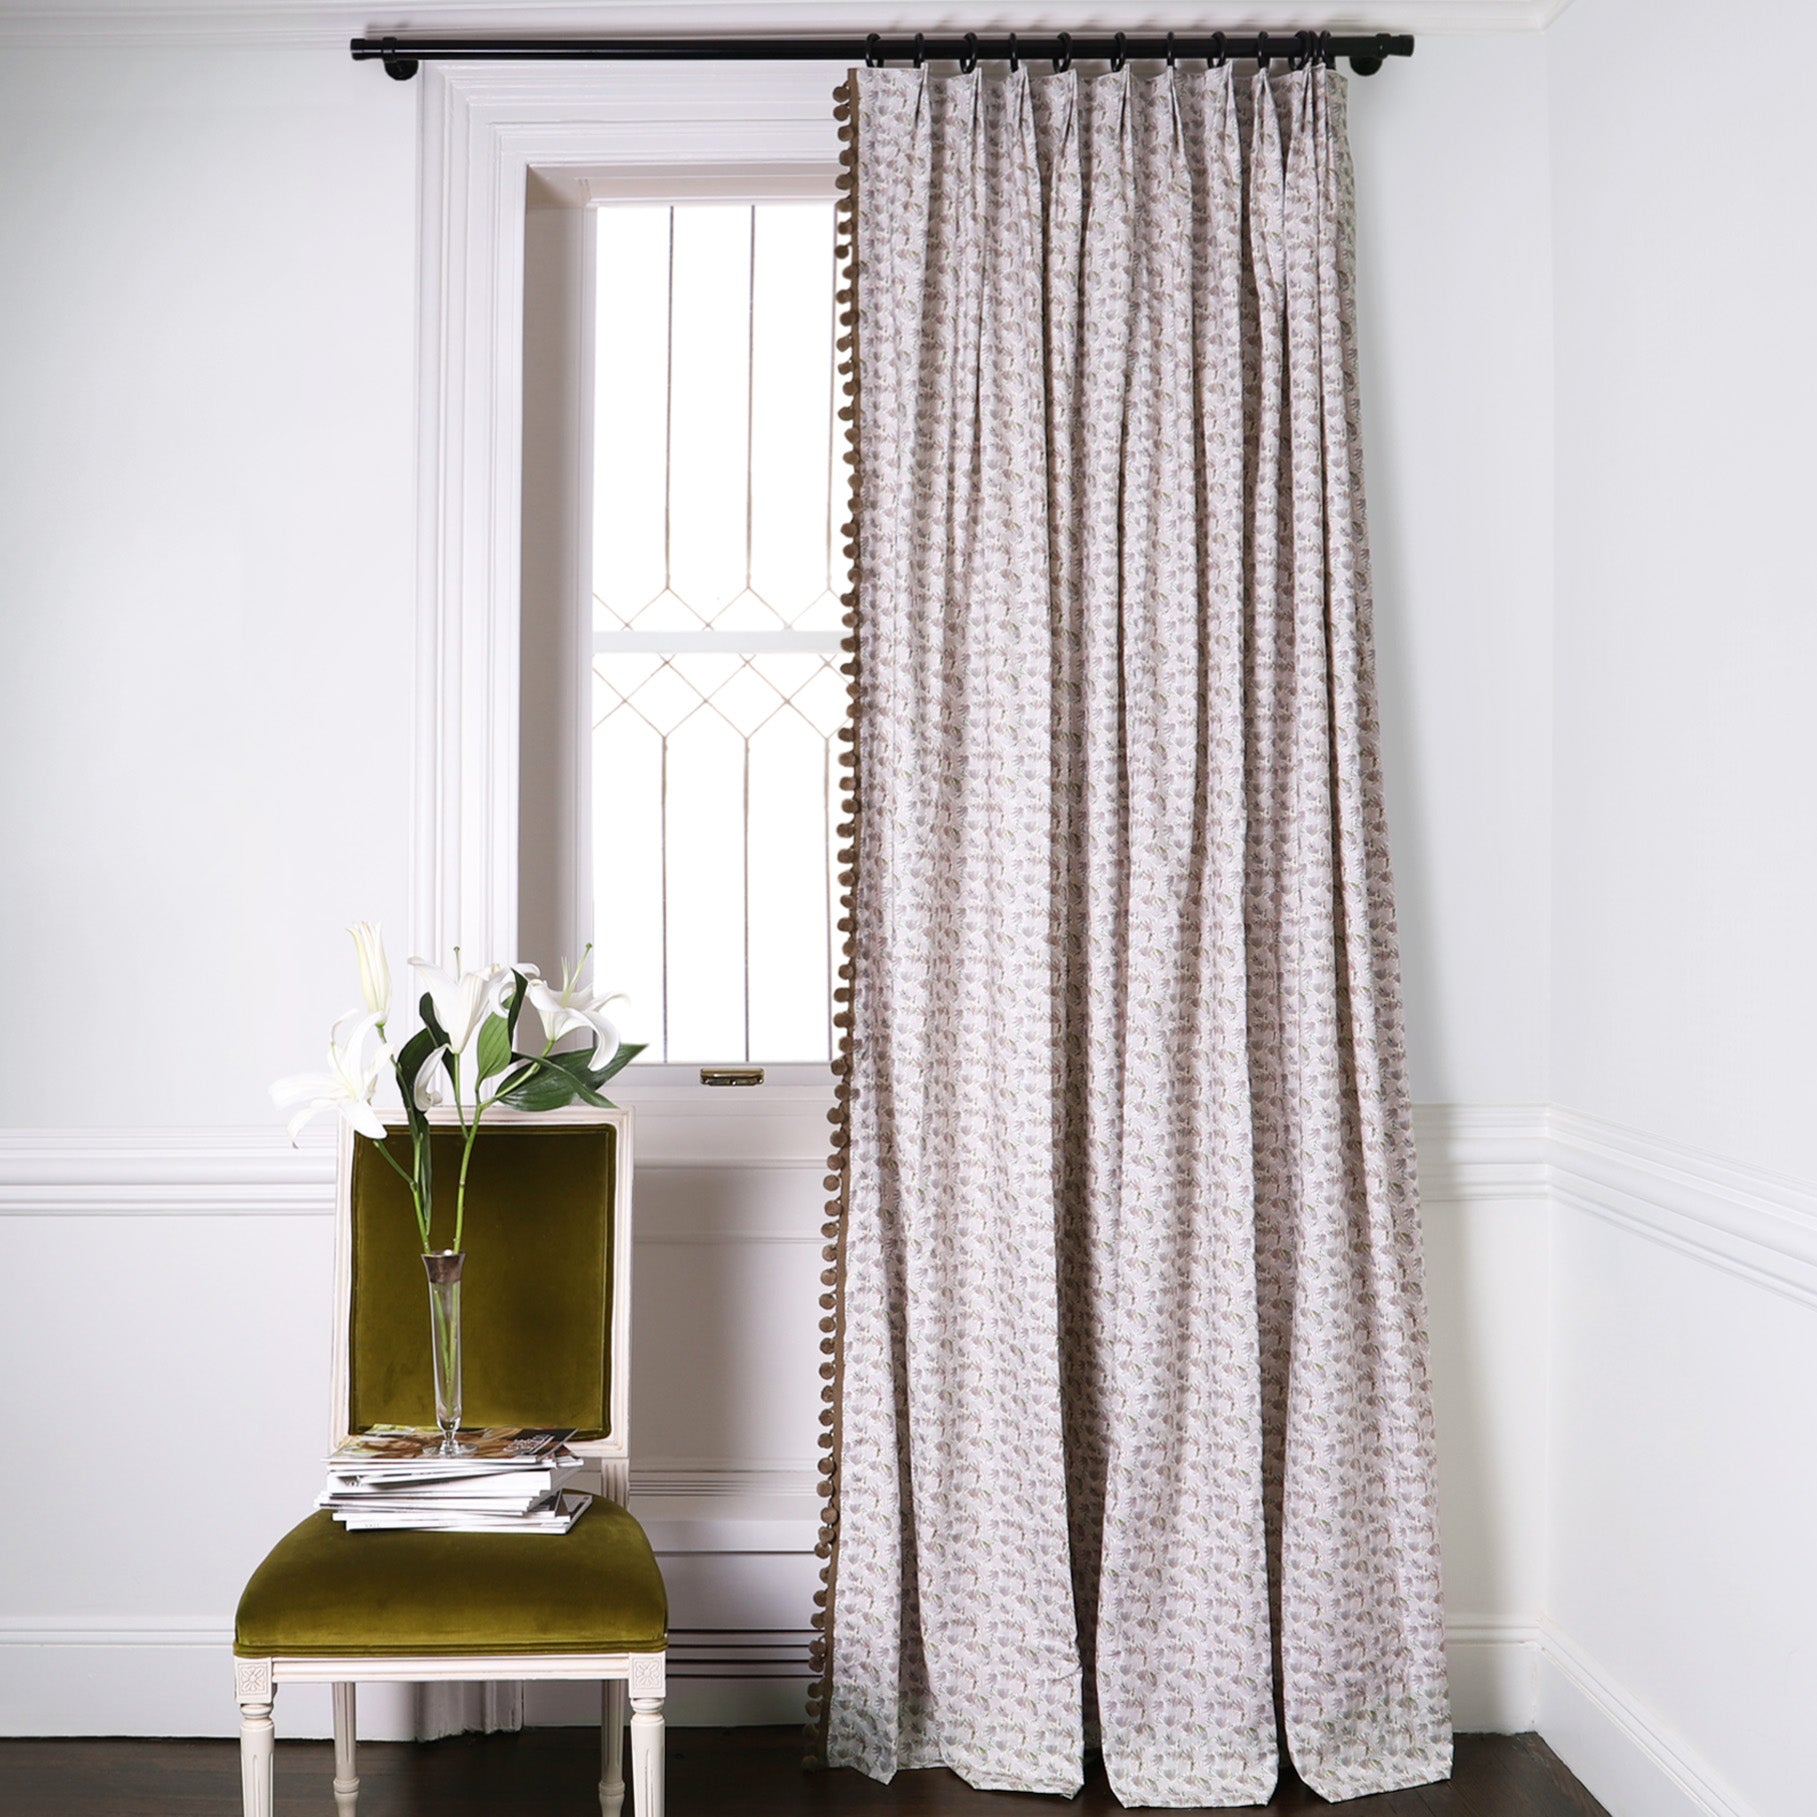 Grey Floral Printed Curtains with brown pom pom fringe on metal rod in front of an illuminated window with Green Moss Velvet chair with tulips on vase on top of stacked magazines